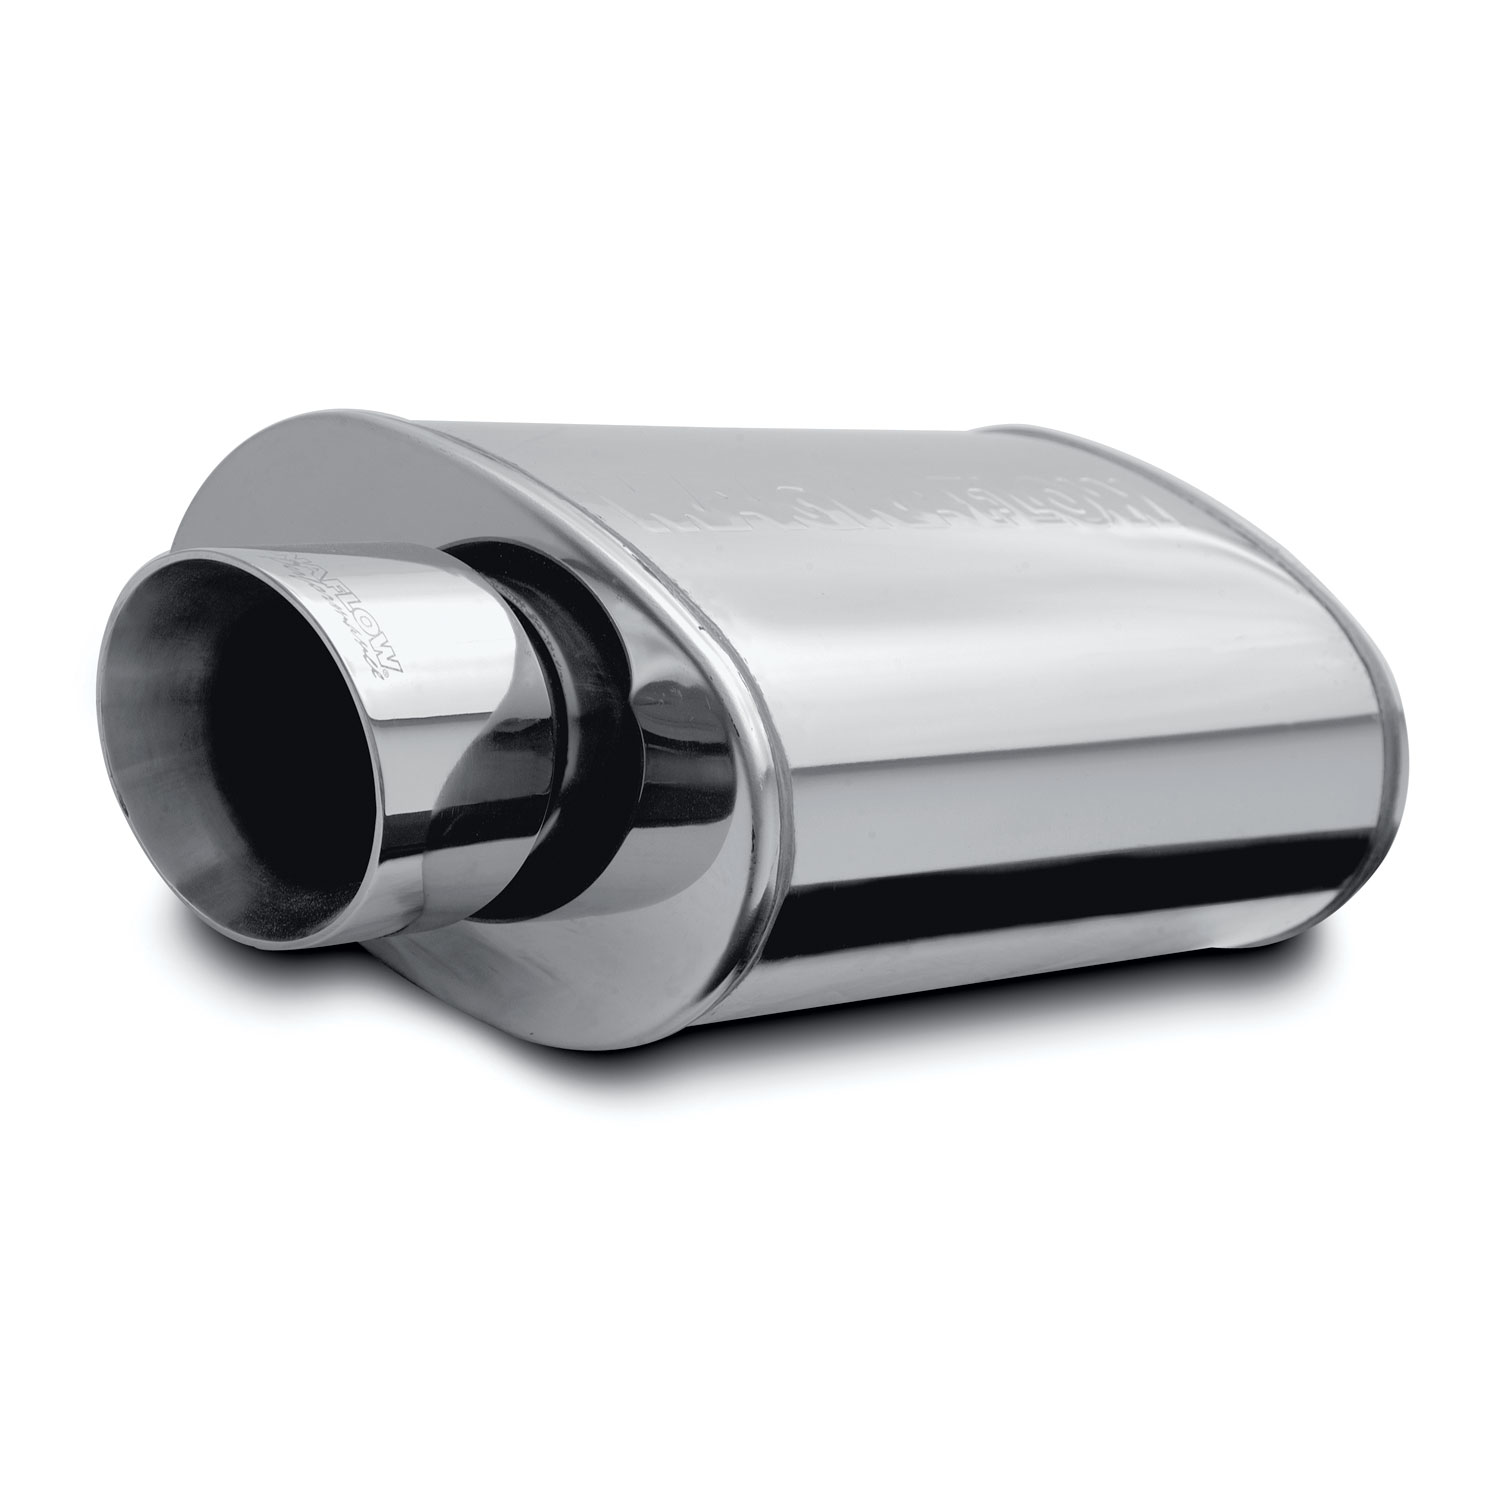 MAGNAFLOW PERF EXHAUST Stainless Bullet Muffler 3in In/Out P/N 14419